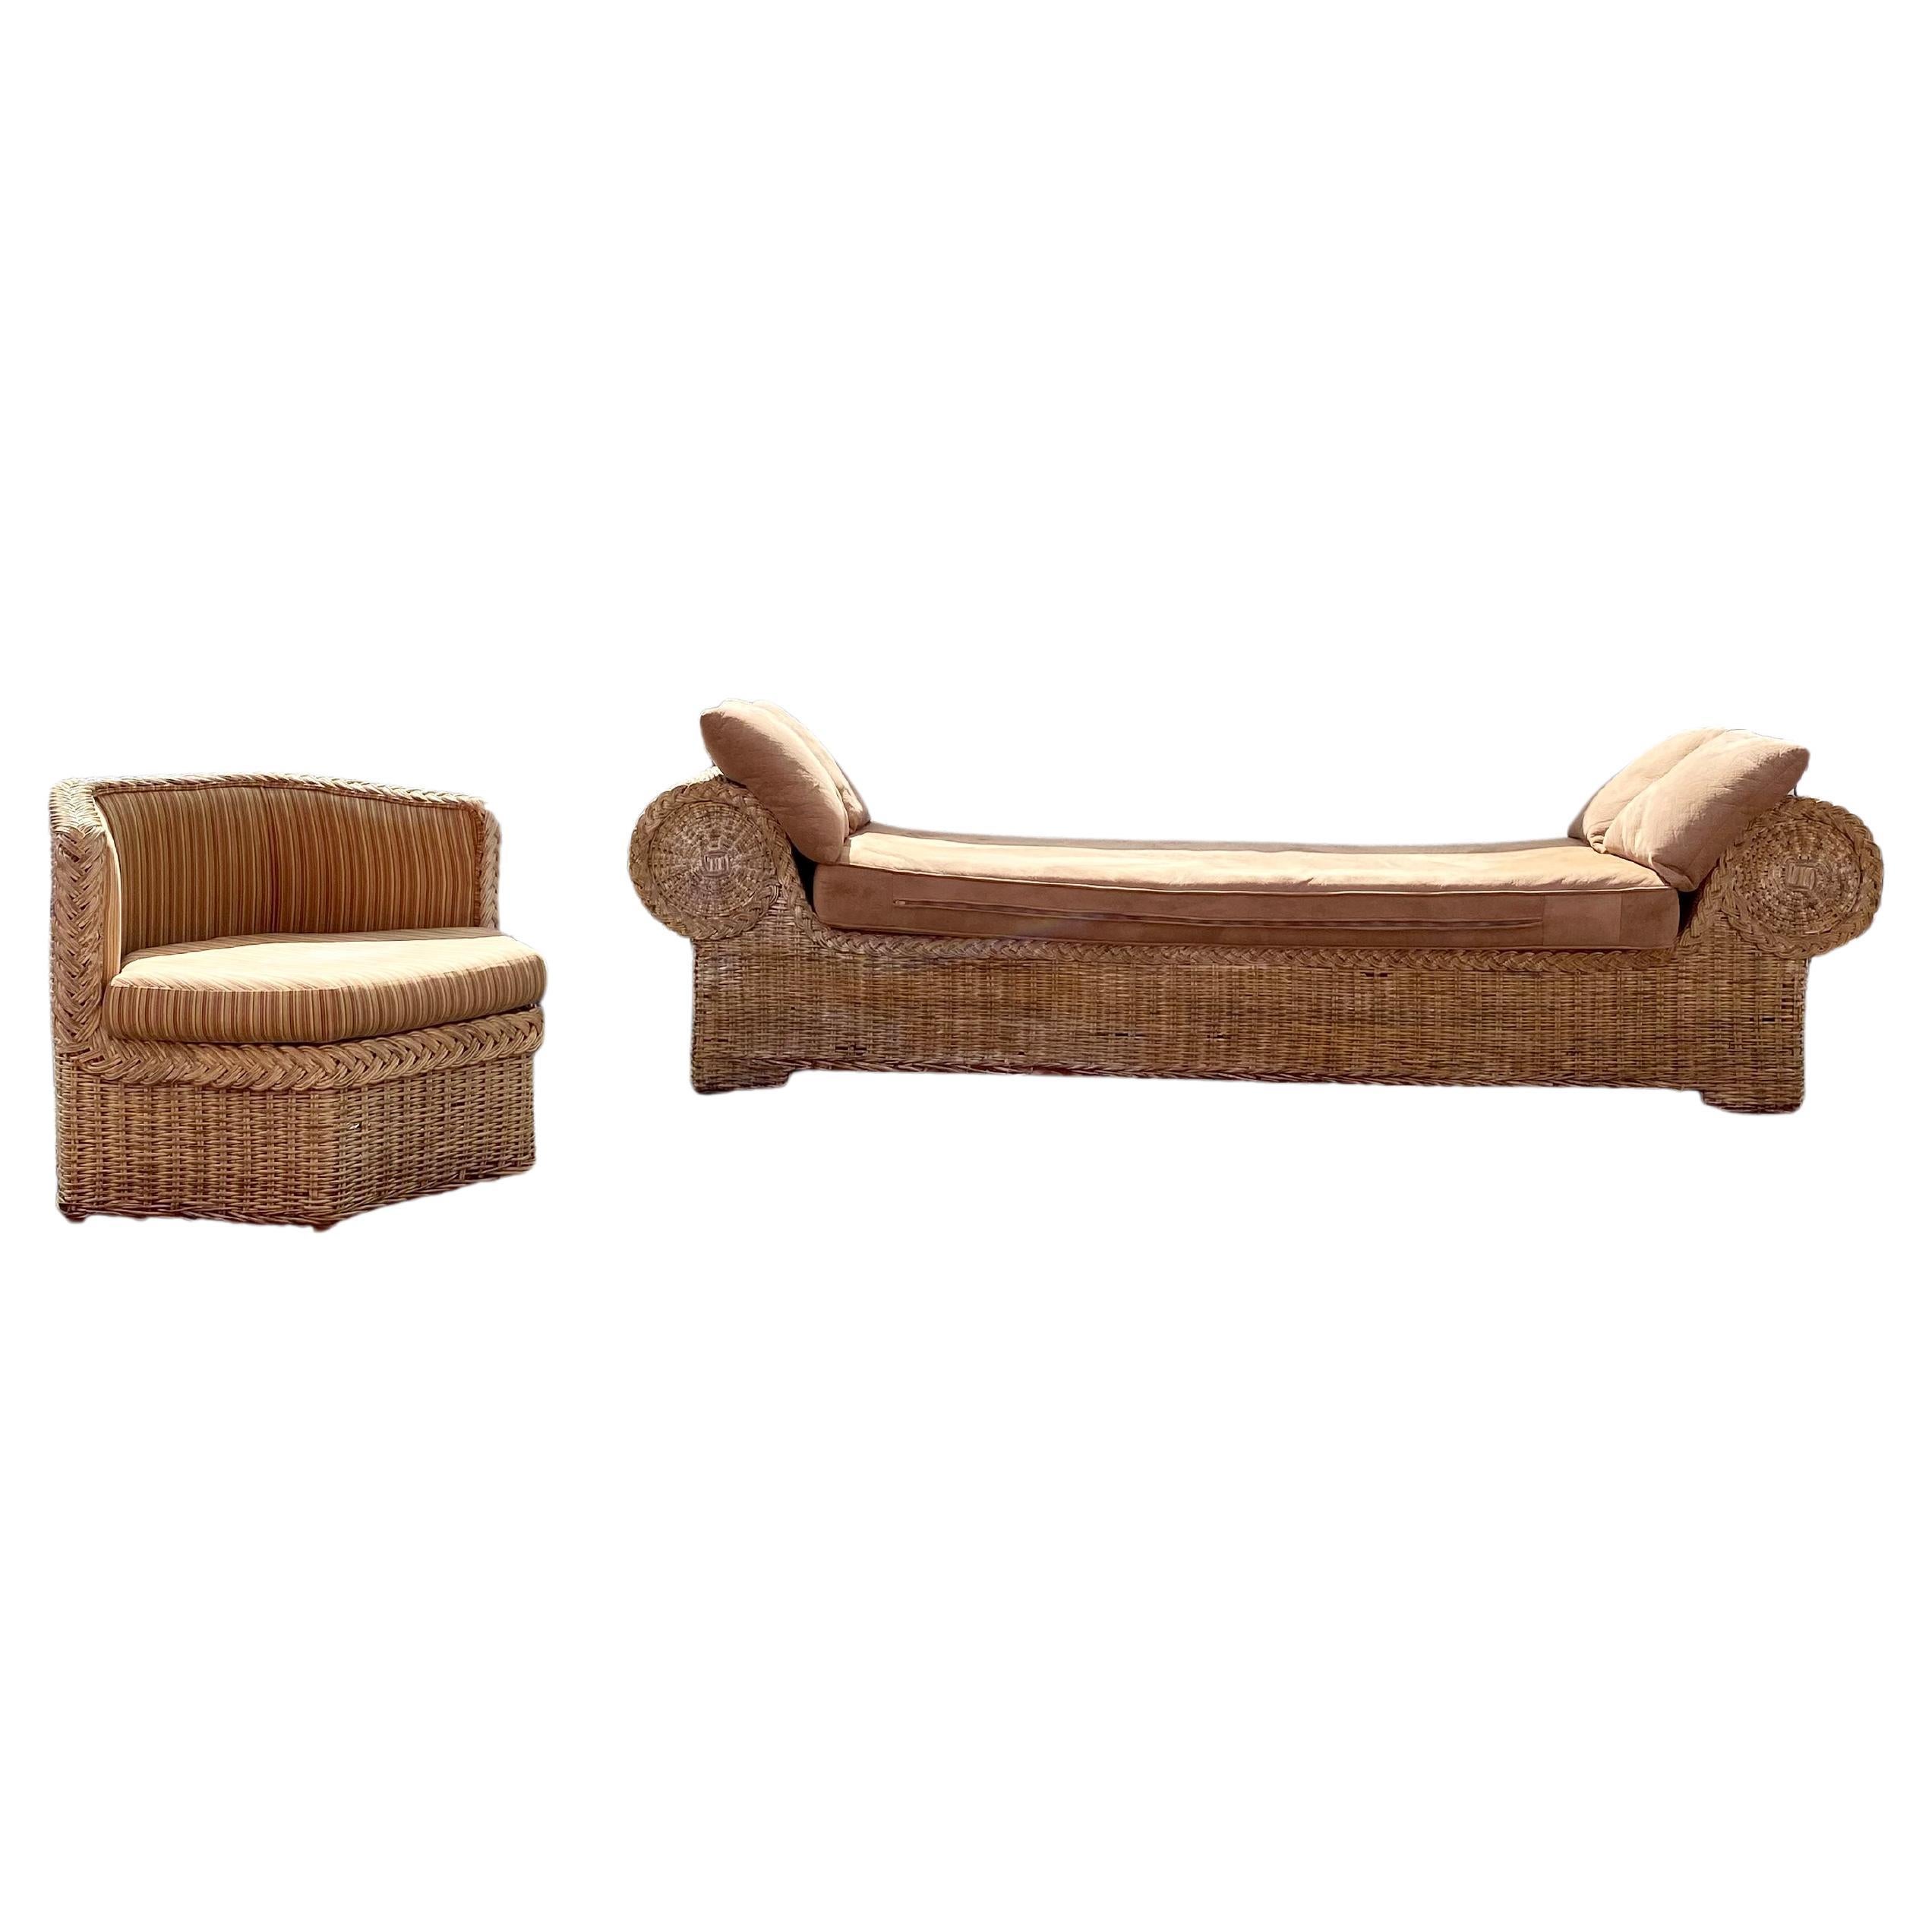 1970s Monumental Rattan Daybed and Chair, Set of 2